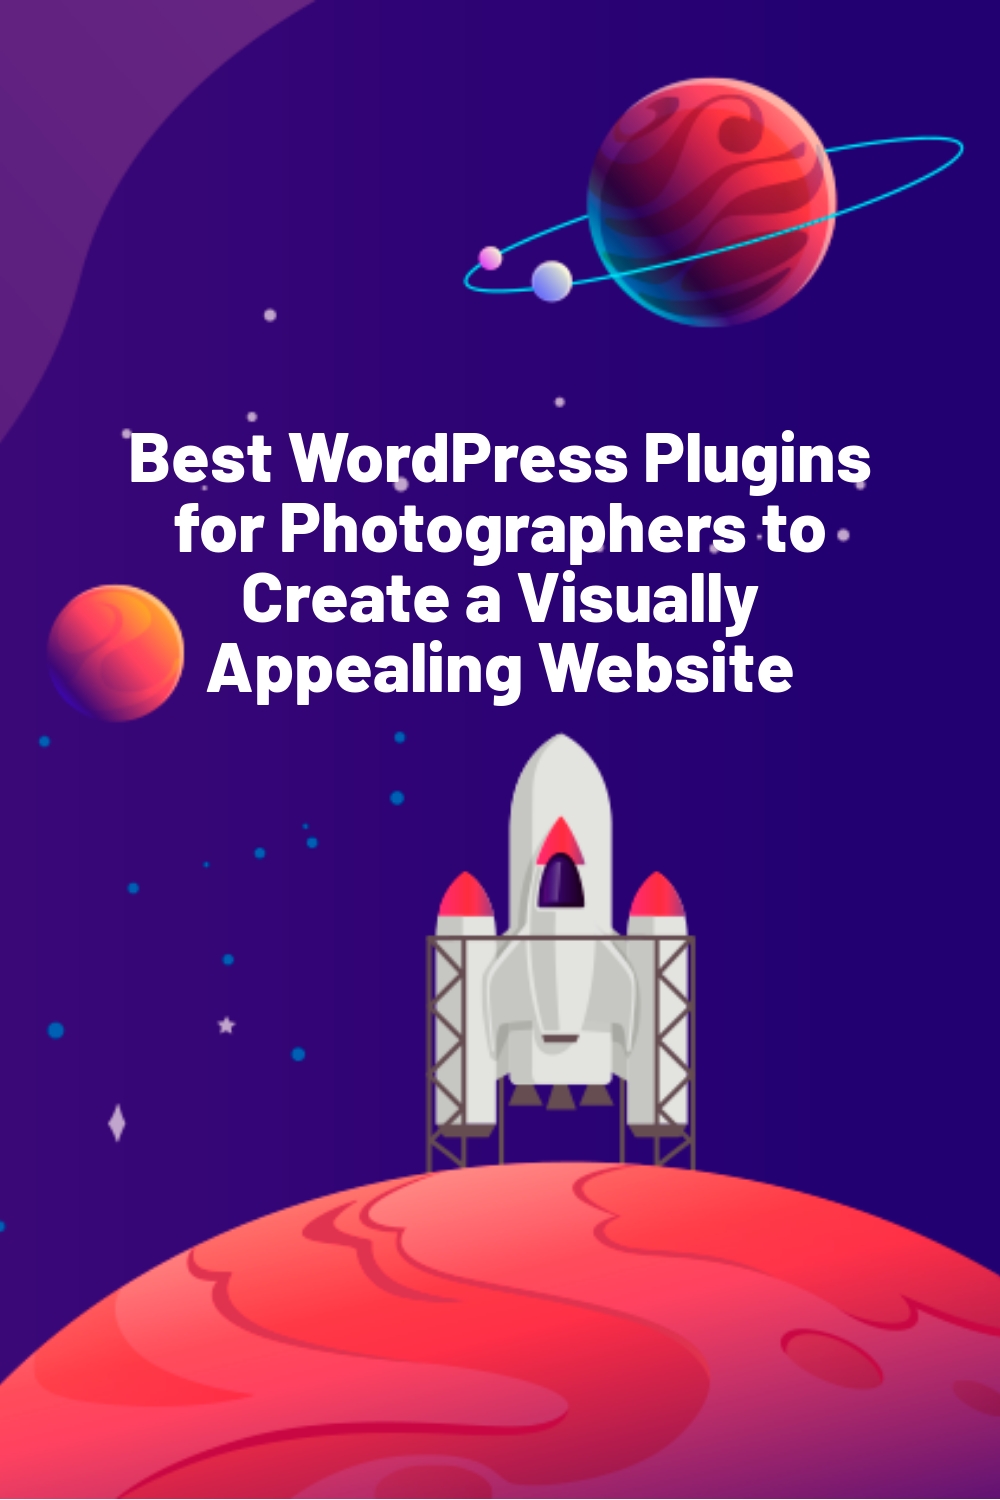 Best WordPress Plugins for Photographers to Create a Visually Appealing Website